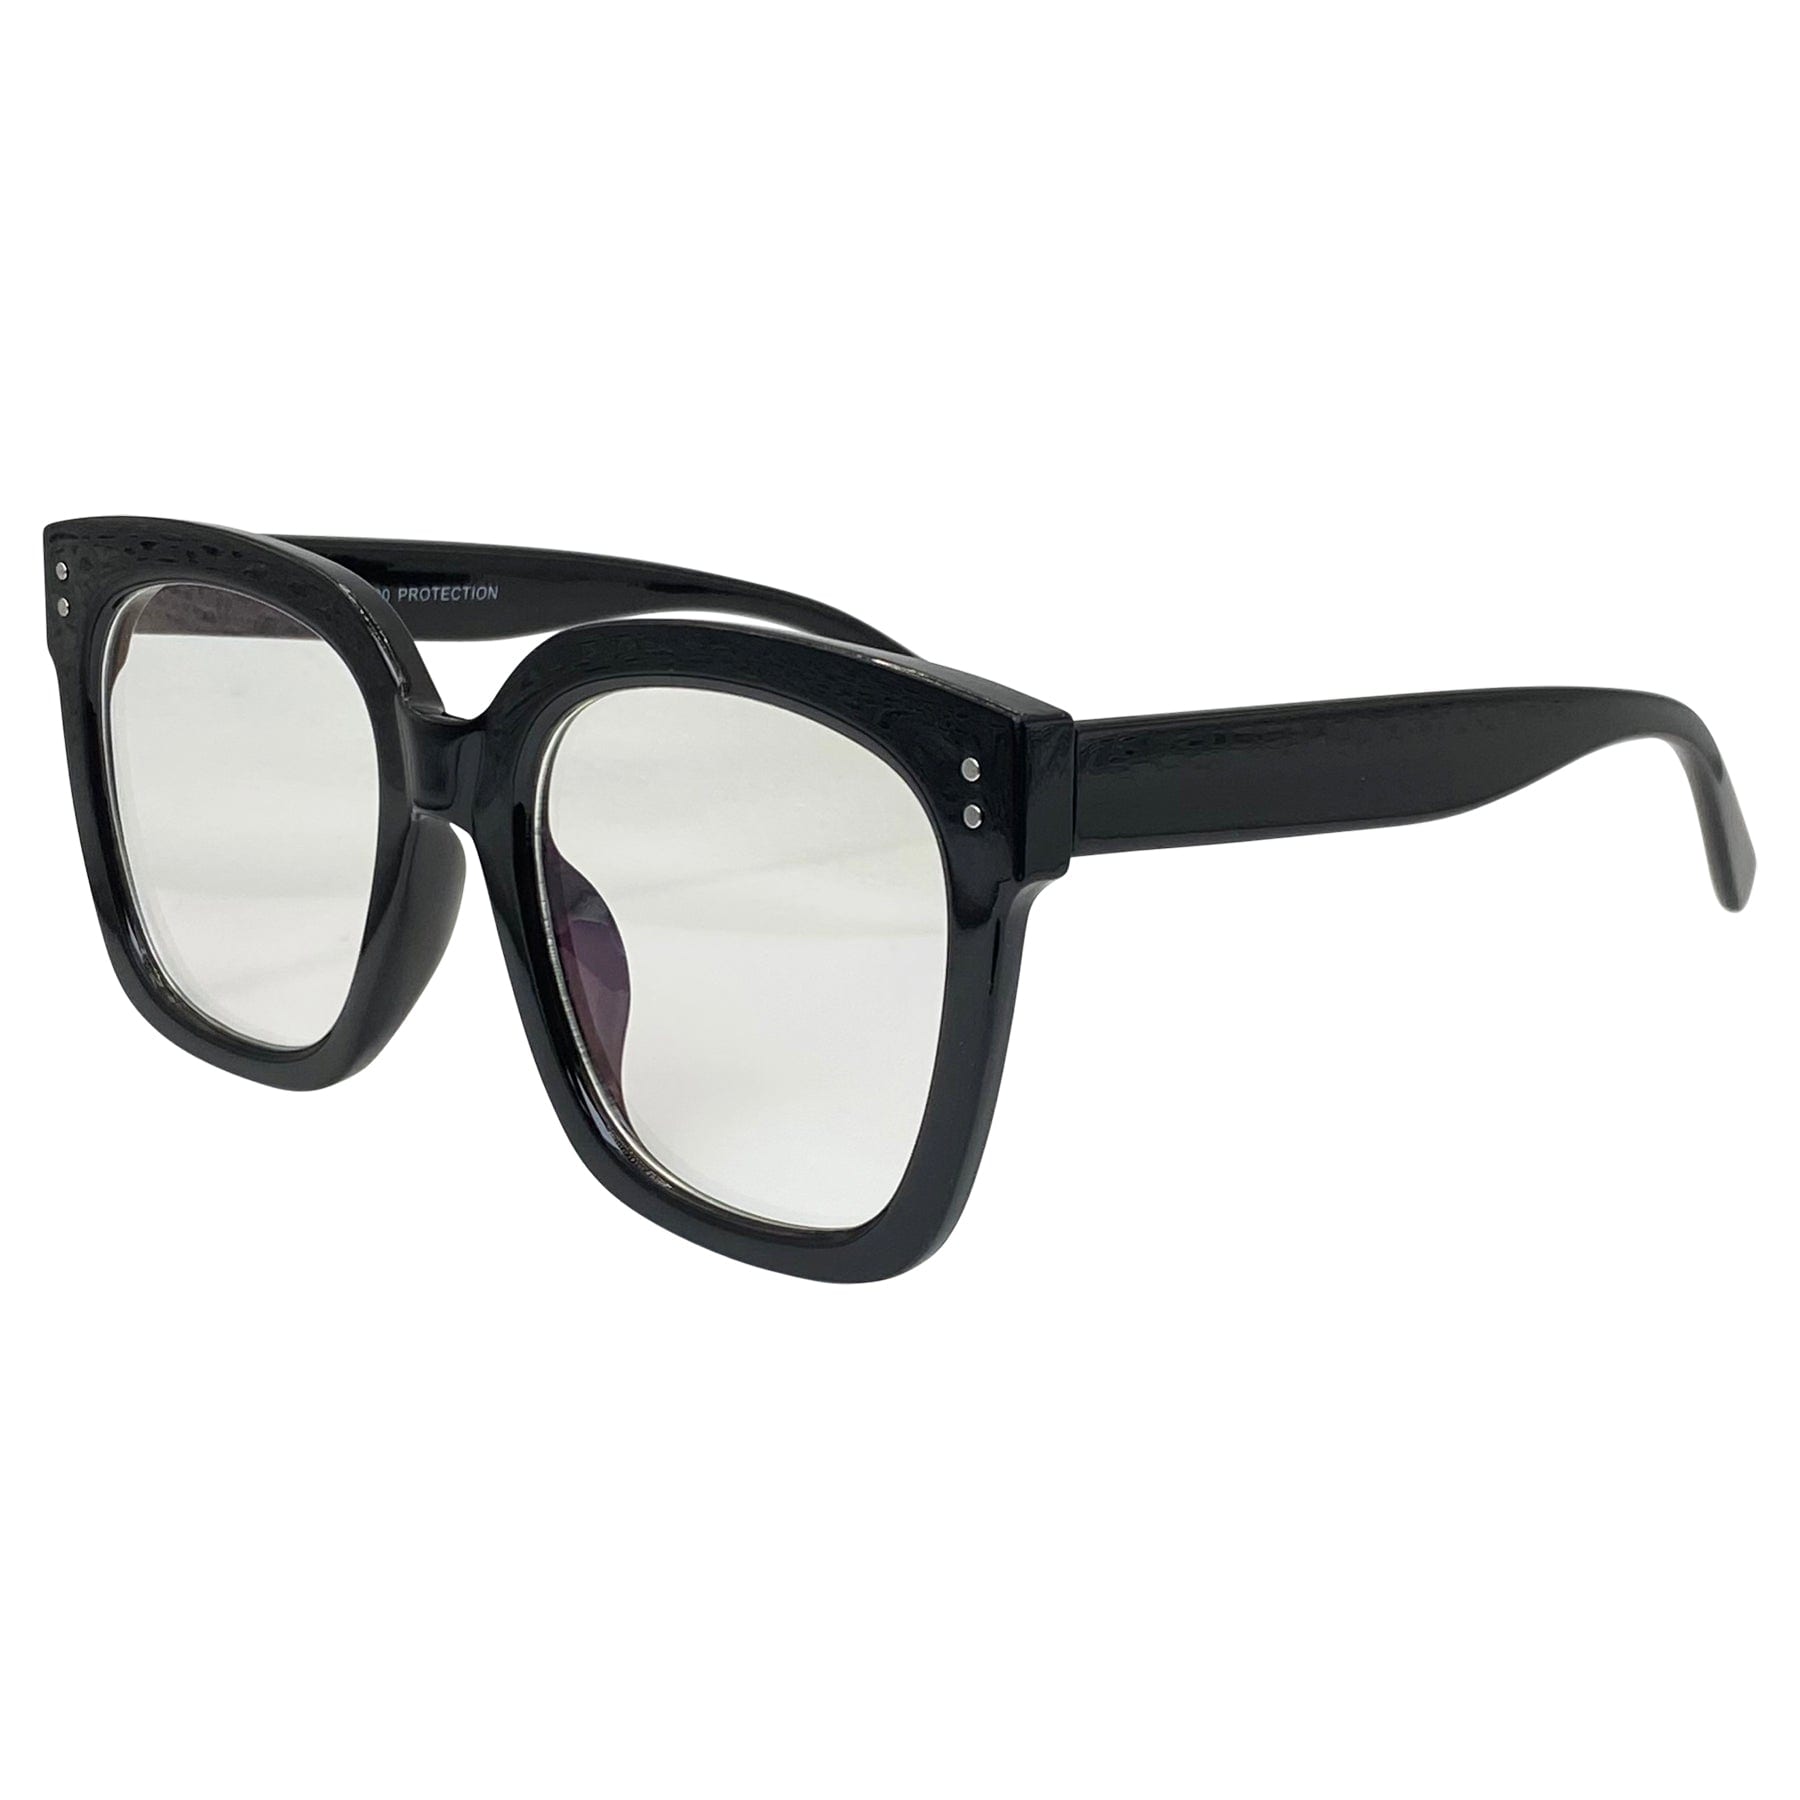 black colored glasses with a clear blueblocker lens